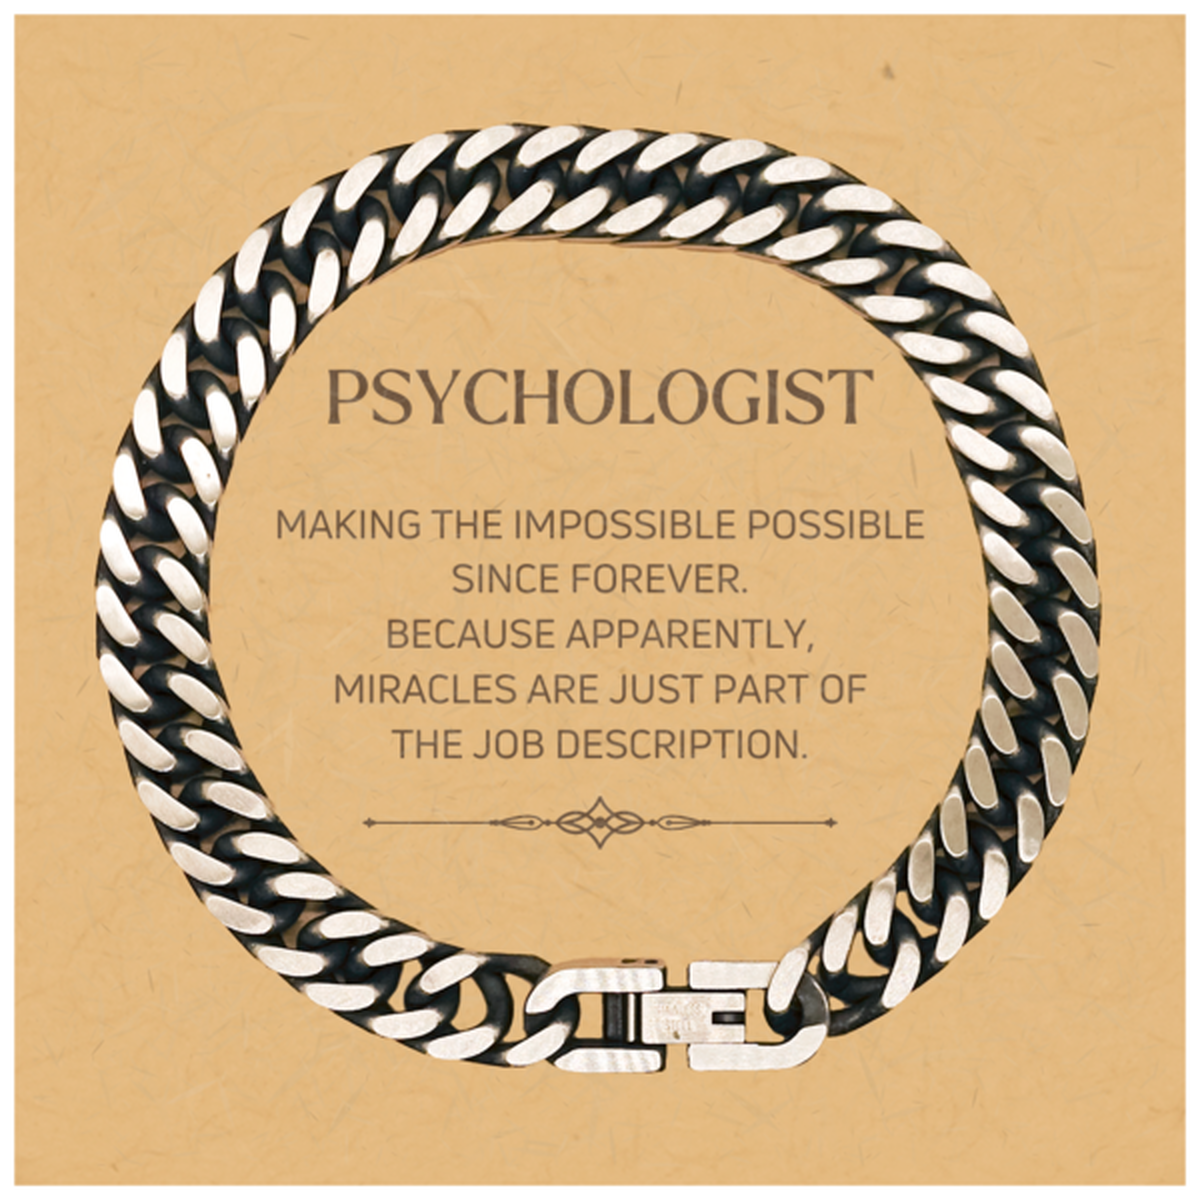 Funny Psychologist Gifts, Miracles are just part of the job description, Inspirational Birthday Christmas Cuban Link Chain Bracelet For Psychologist, Men, Women, Coworkers, Friends, Boss